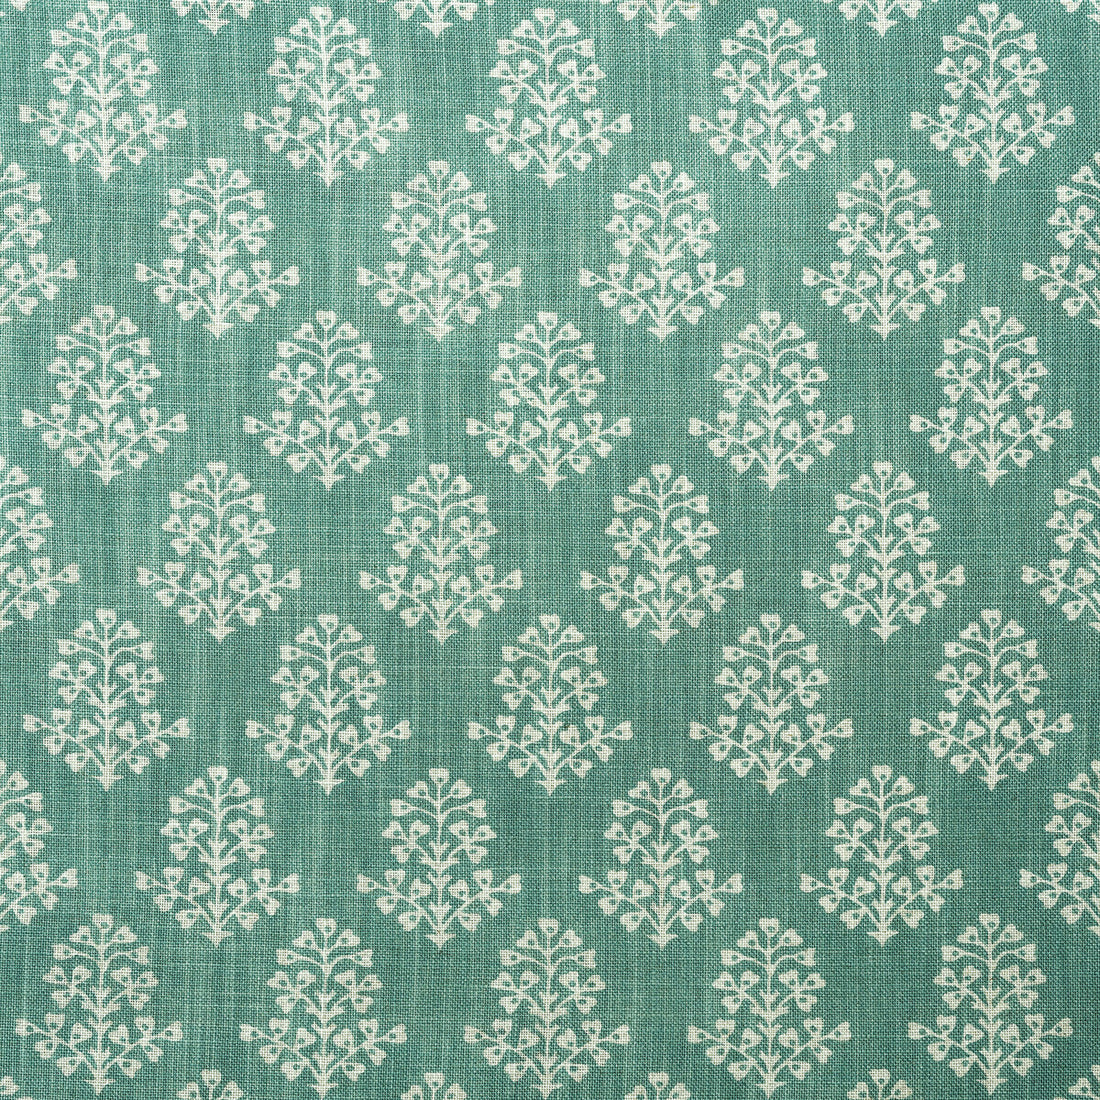 Sprig fabric in turquoise color - pattern AM100384.13.0 - by Kravet Couture in the Andrew Martin Garden Path collection